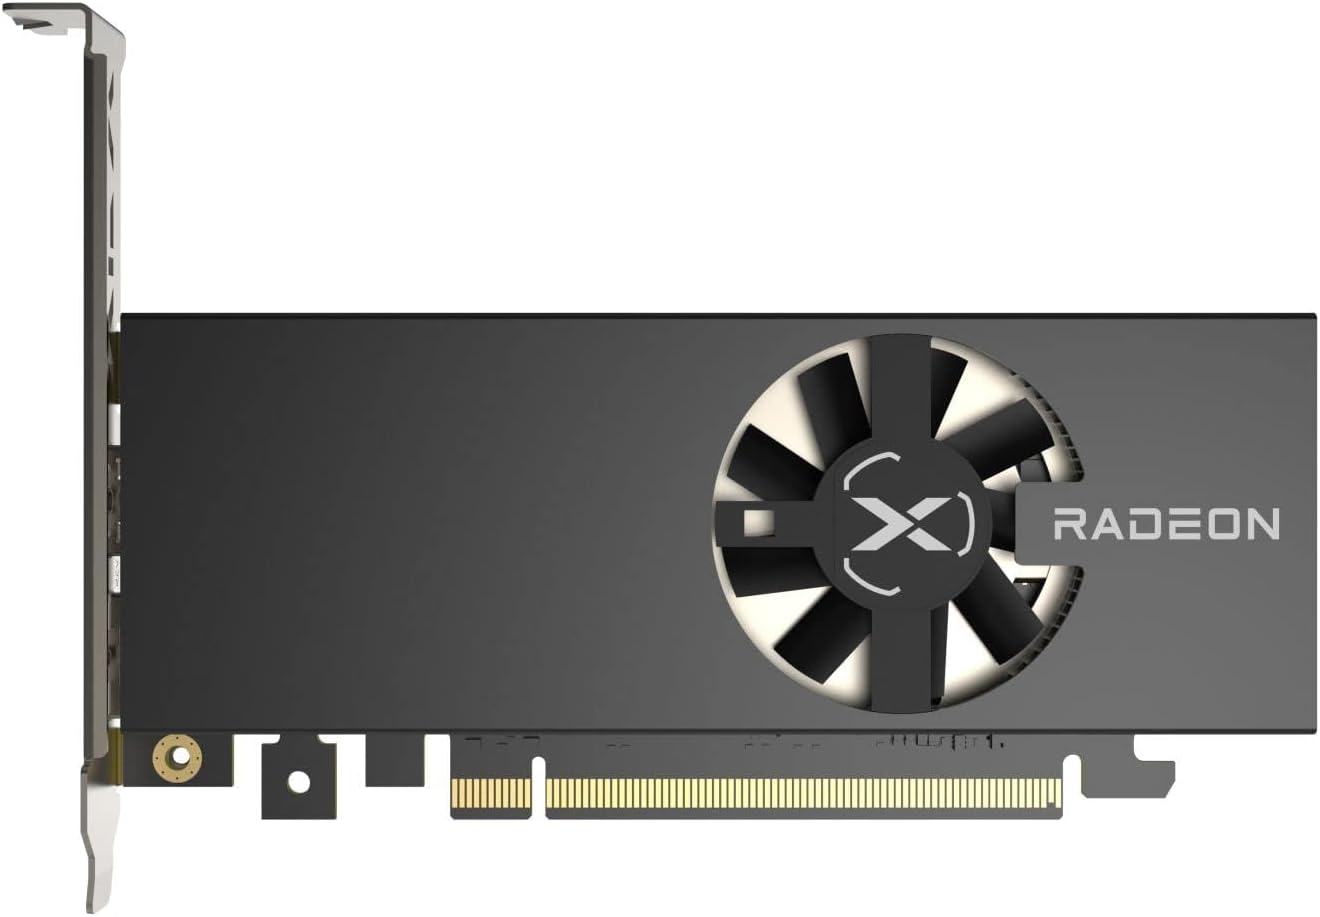 XFX Speedster Swft105 Radeon Rx 6400 Gaming Graphics Card With 4Gb Gddr6, AMD Rdna™ 2